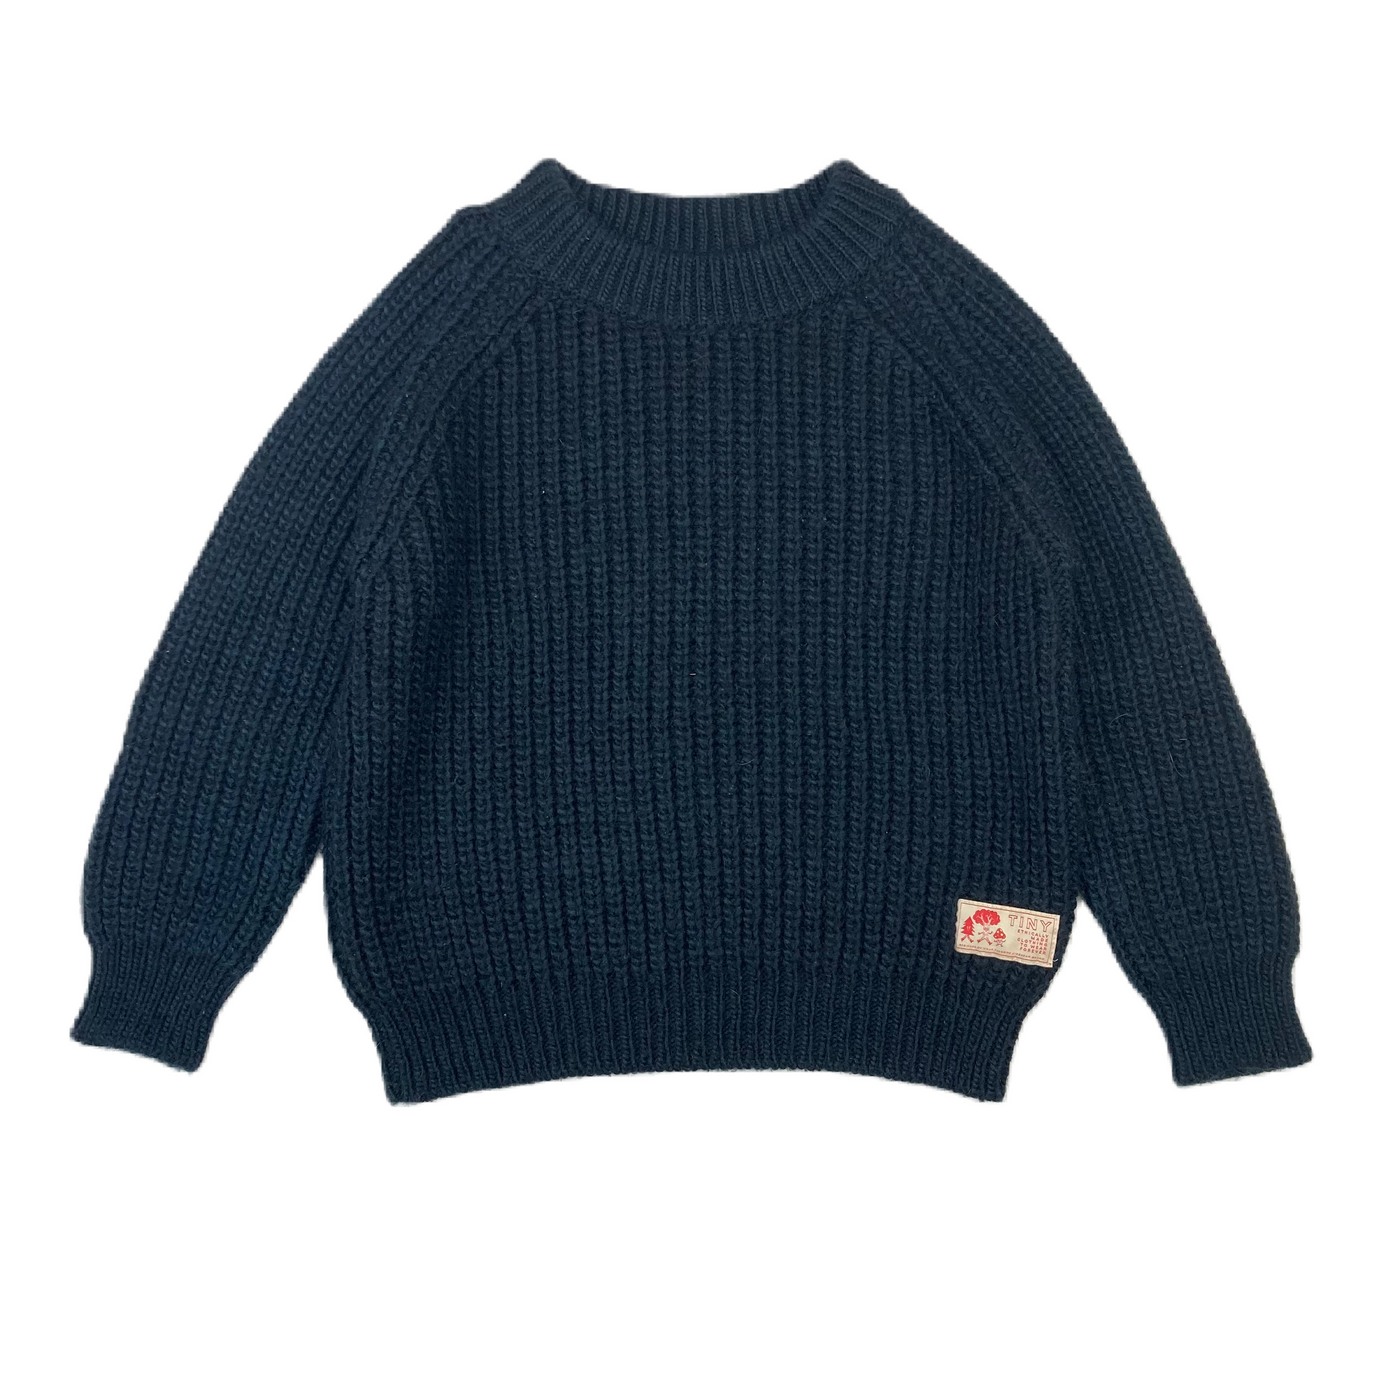 Tiny Cottons - Knitted sweater black 10y